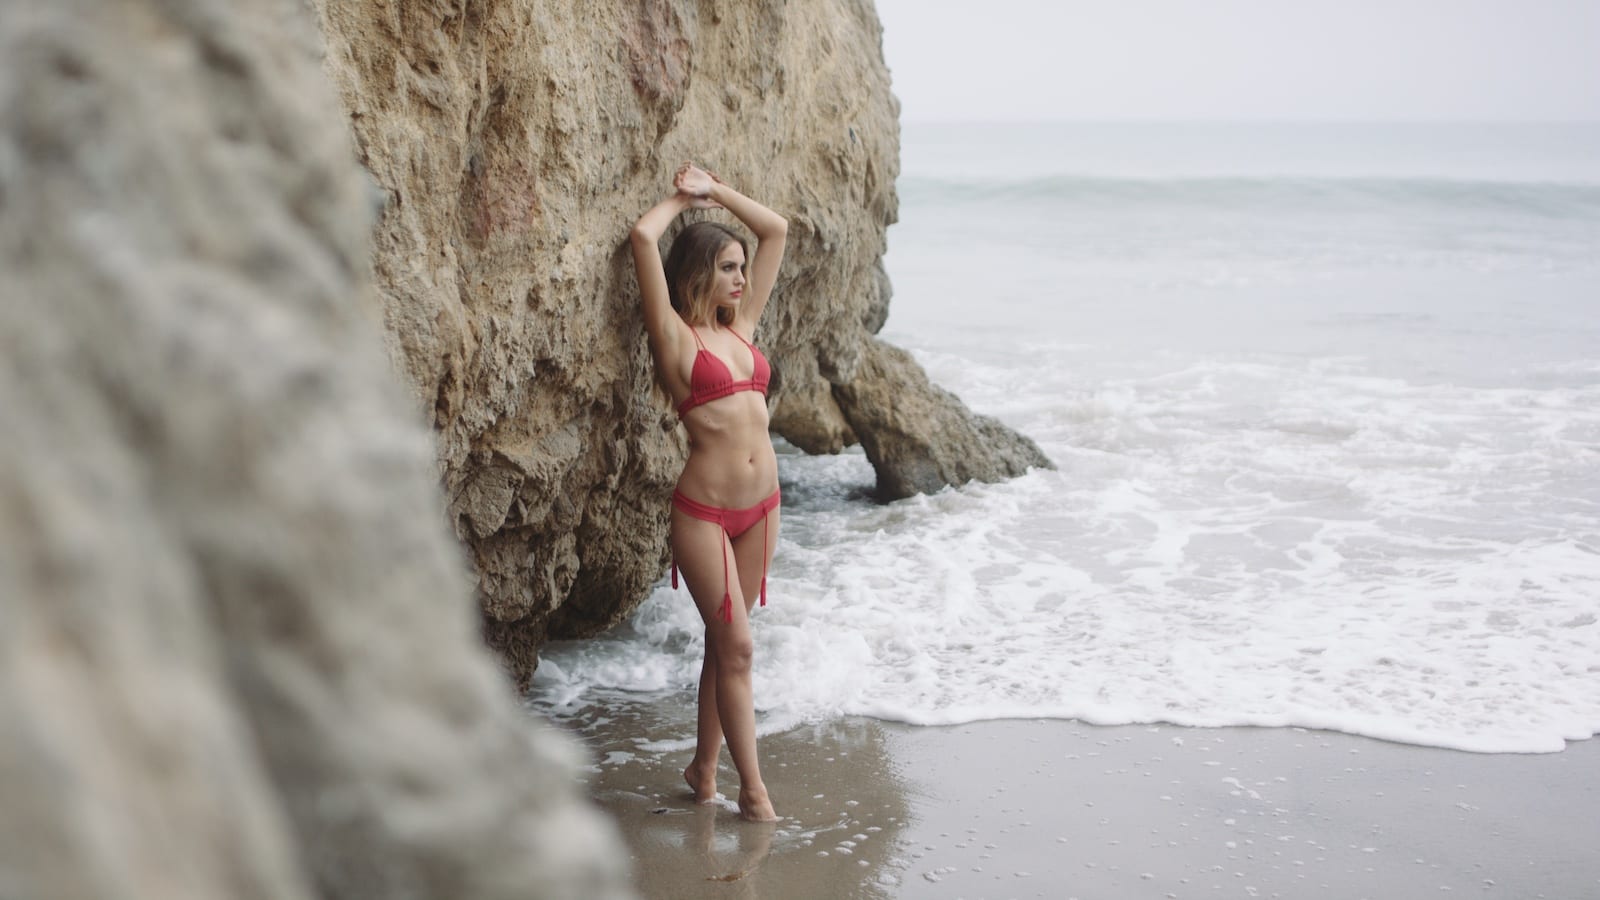 Montce Swim Ad 2.28.1 Woman with long blond hair wearing a red bikini posing for camera on a beach standing in the water with her arms over her head leaning against a rocky outcrop